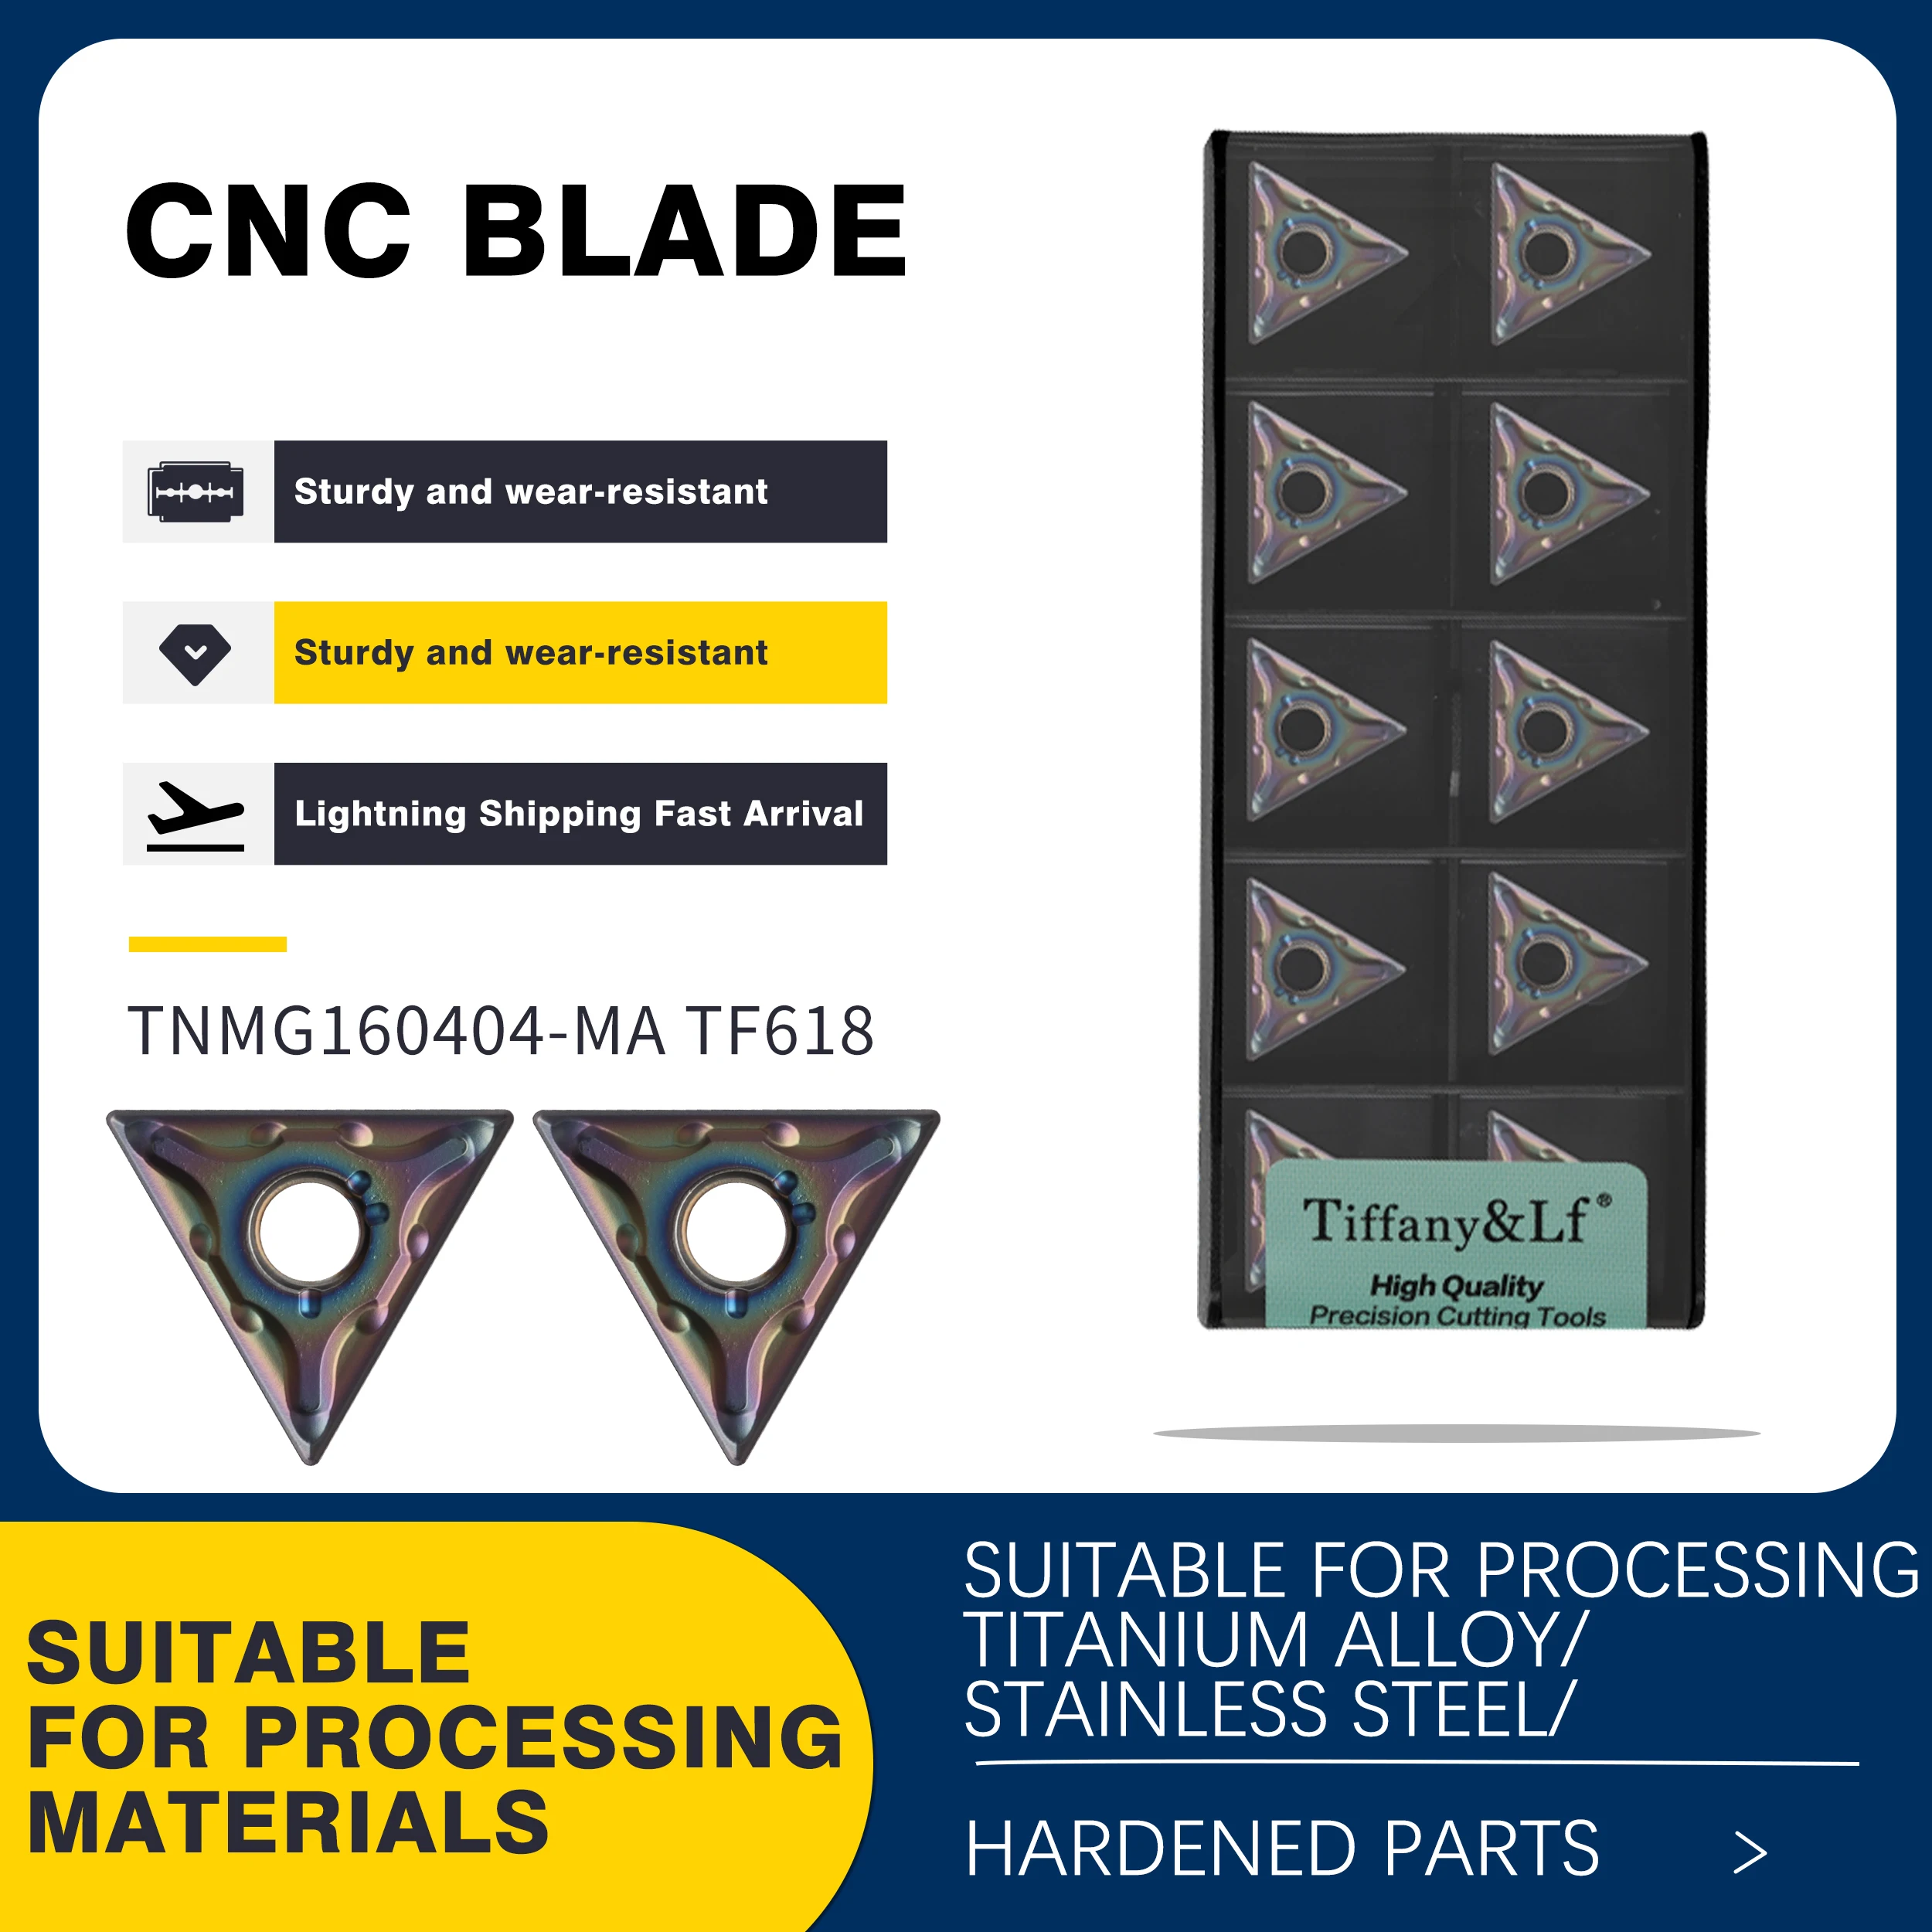 

TNMG160404-MA TF618 TNMG160408-MA MS CNC Lathe Colorful Carbide Inserts Wear-Resistant External Turning Tools,For Hardened Steel